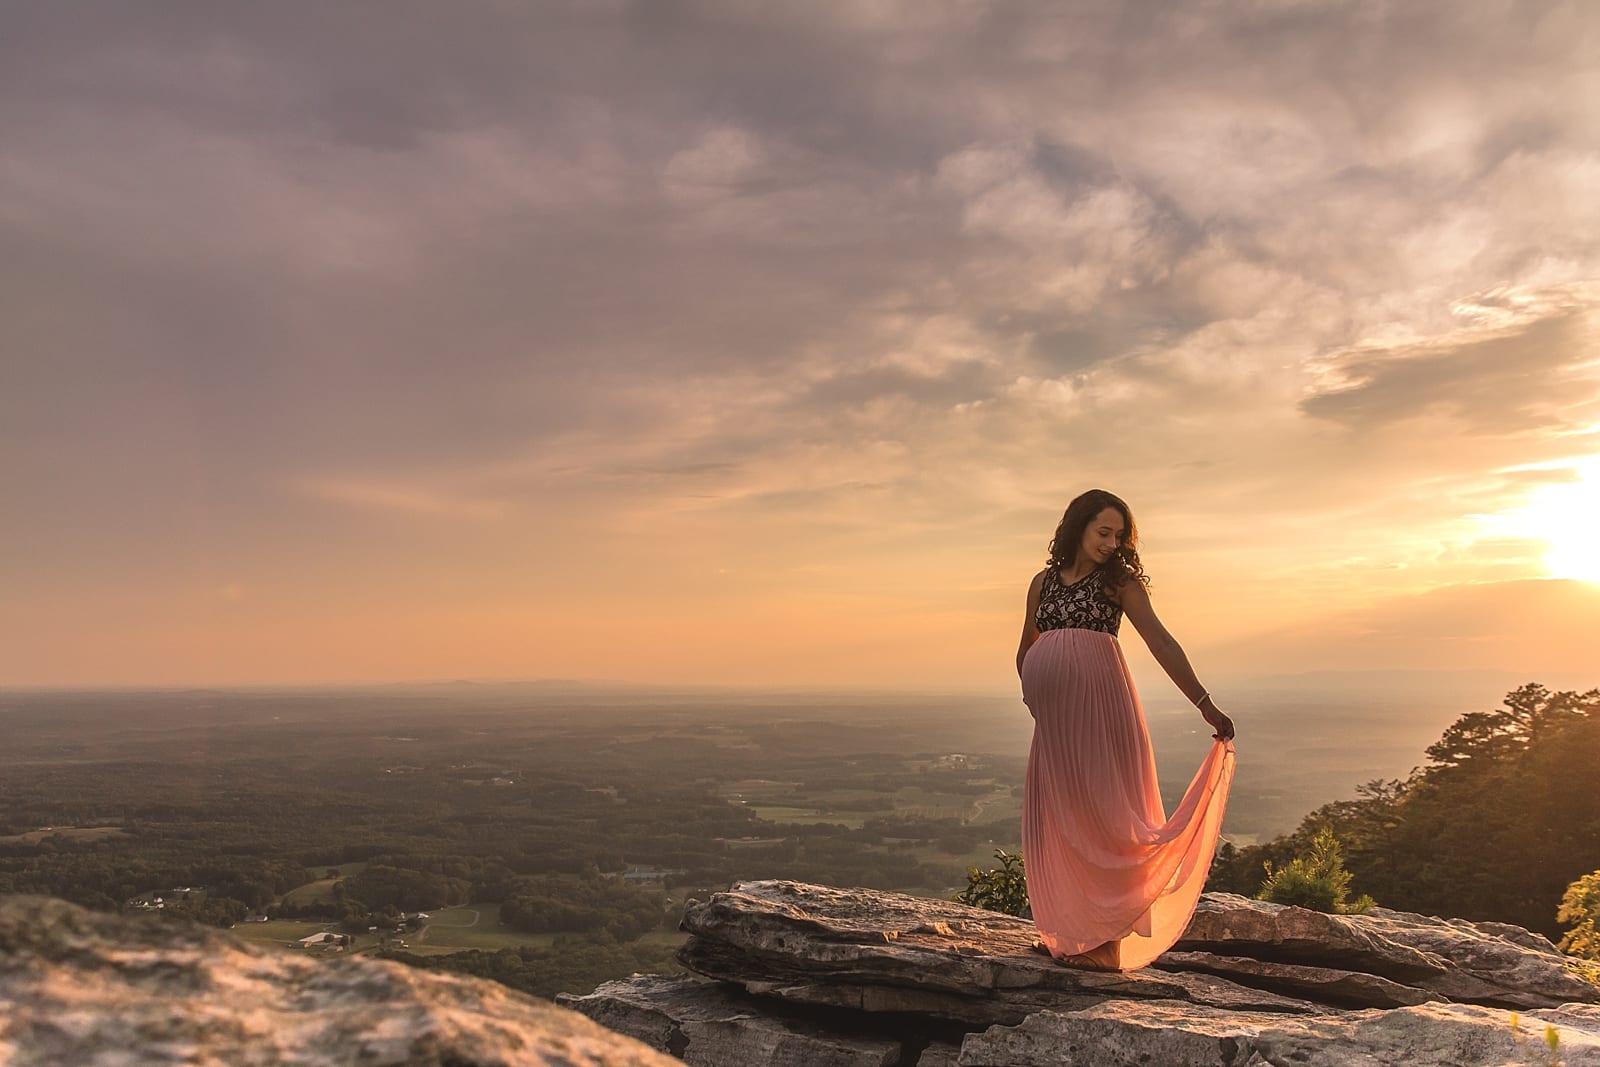 pilot mountain maternity photography session